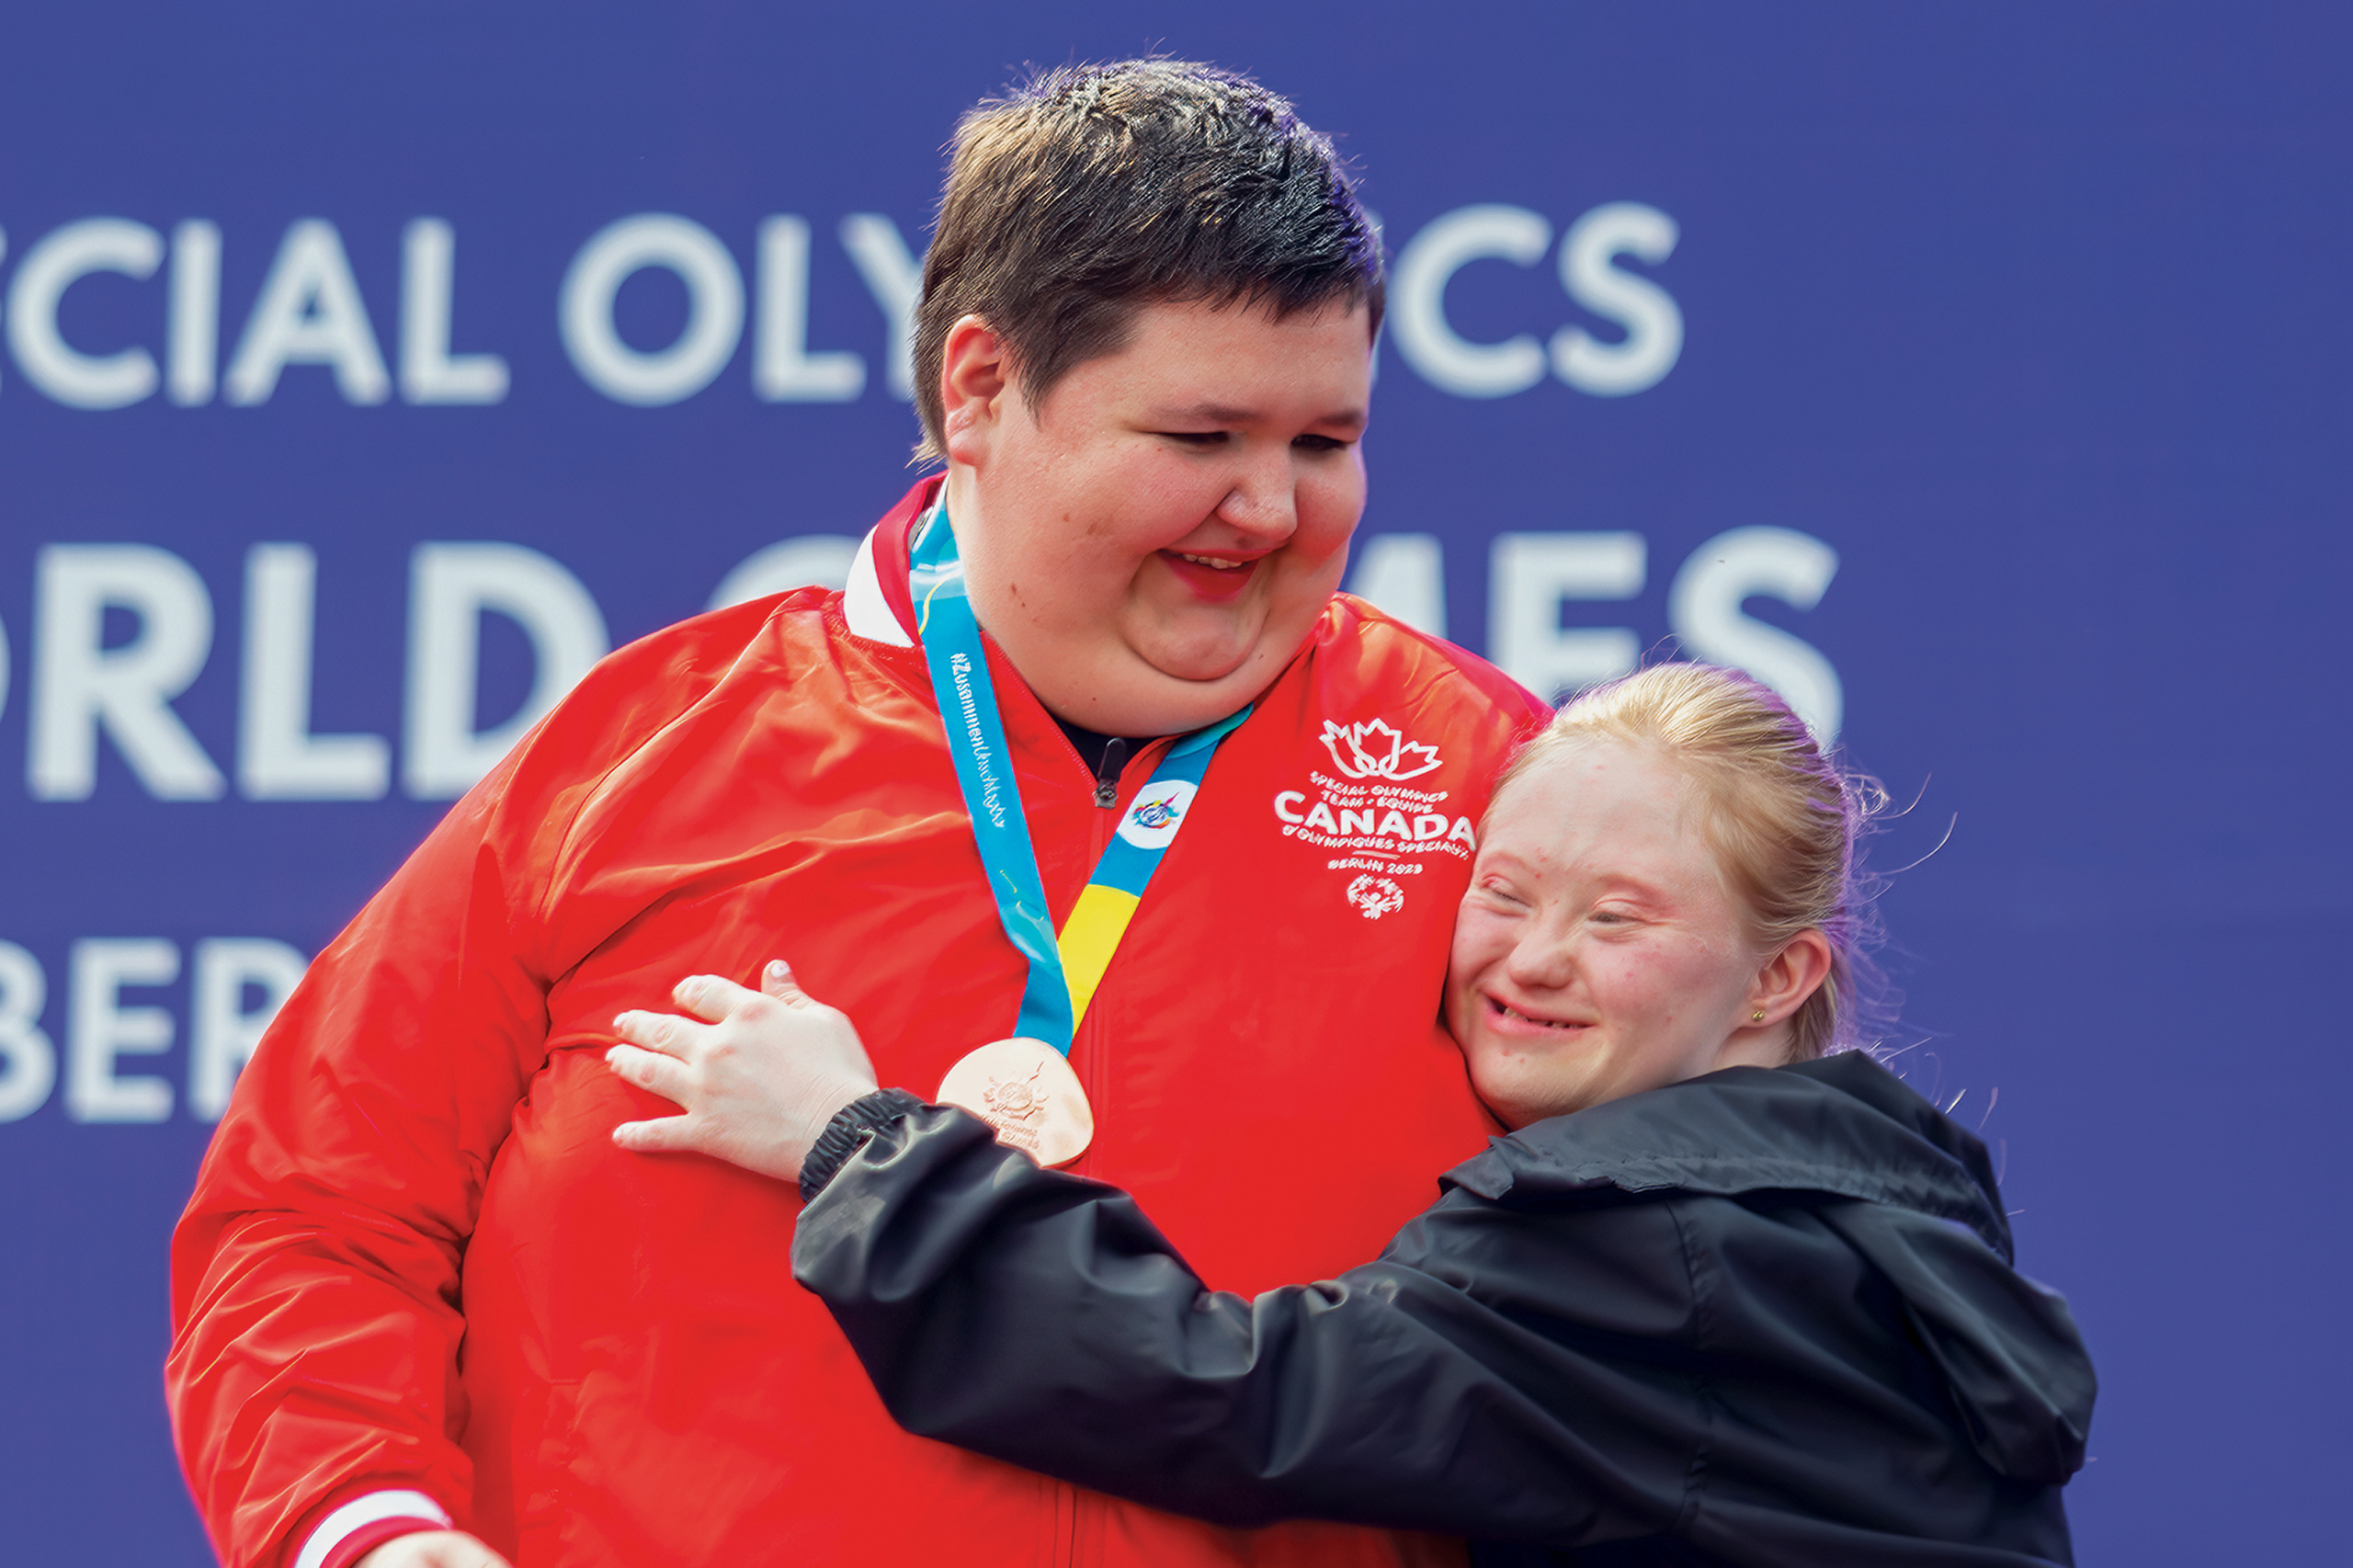 Patricia & her silver medalist counter-part on the podium at the 2023 Special Olympic World Games in Berlin